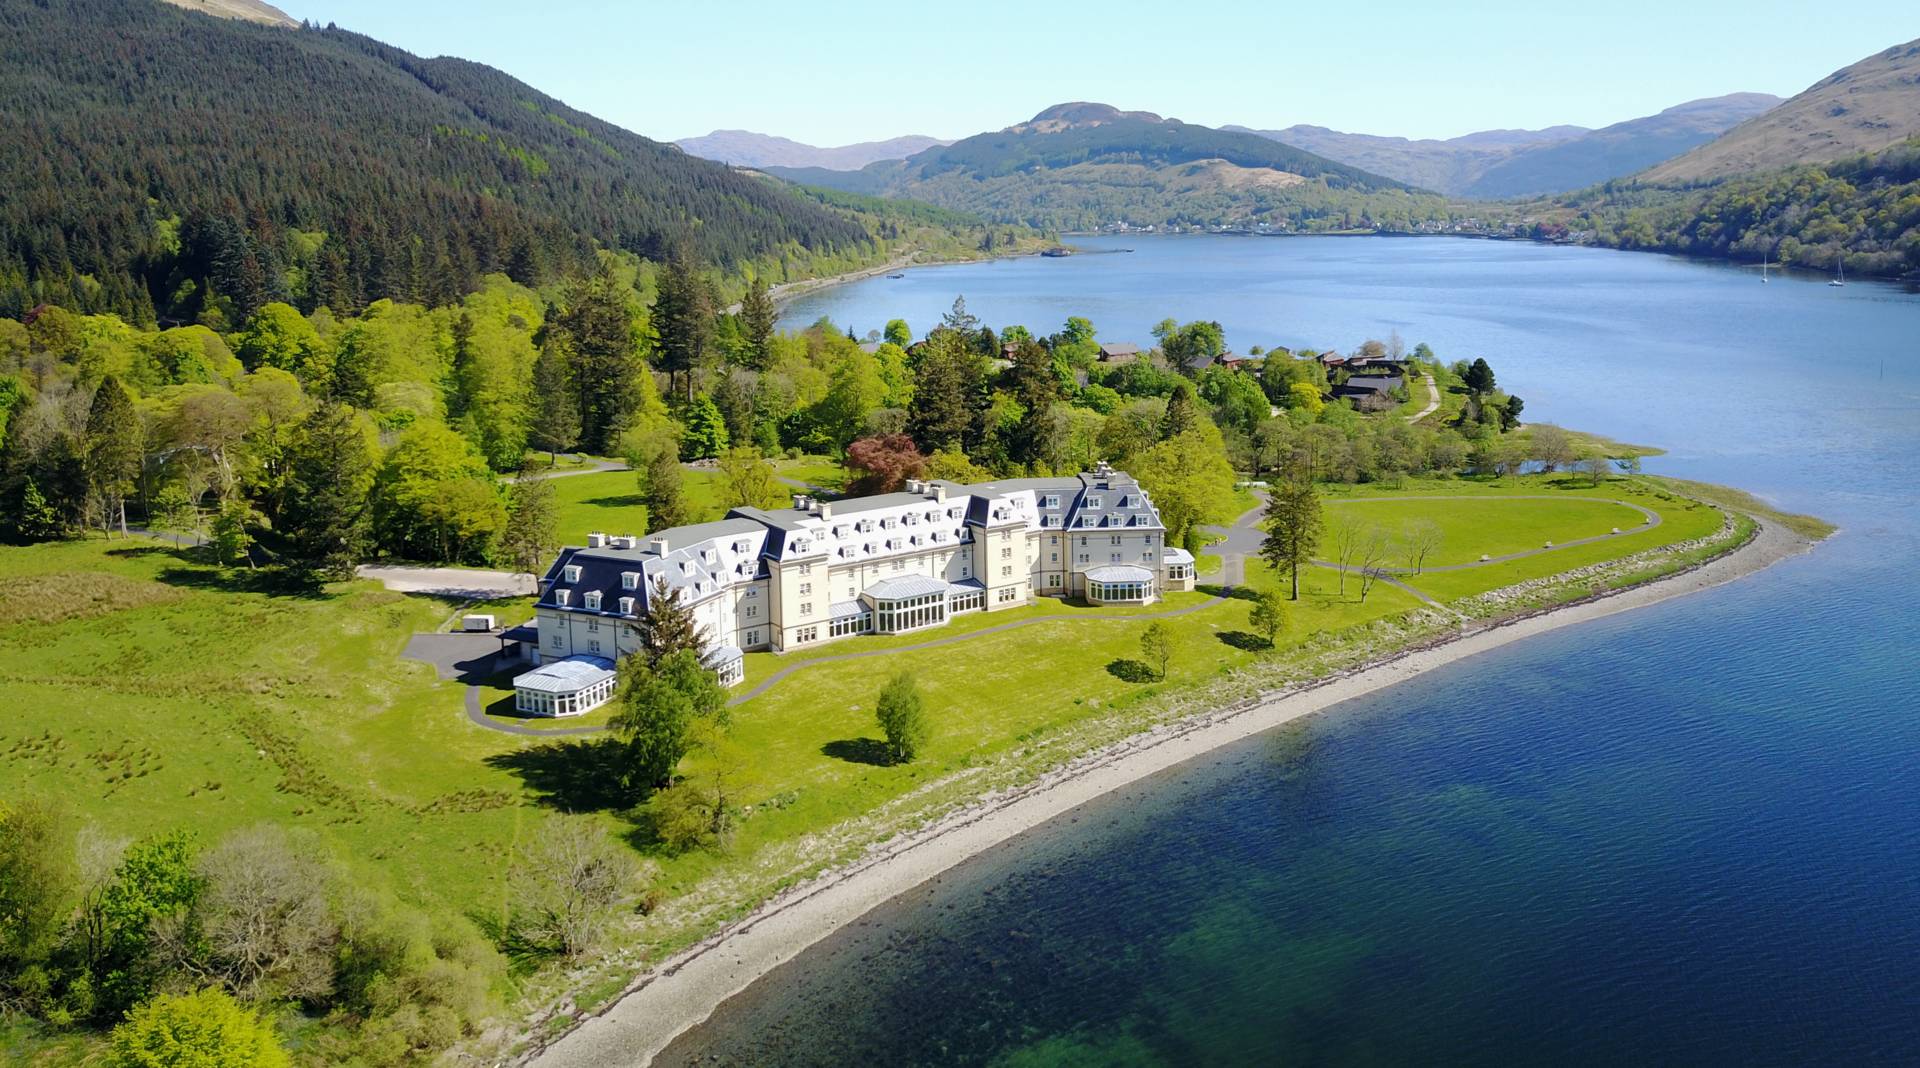 View Ardgartan Hotel from the sky in this ariel picturesque Scottish landscapes